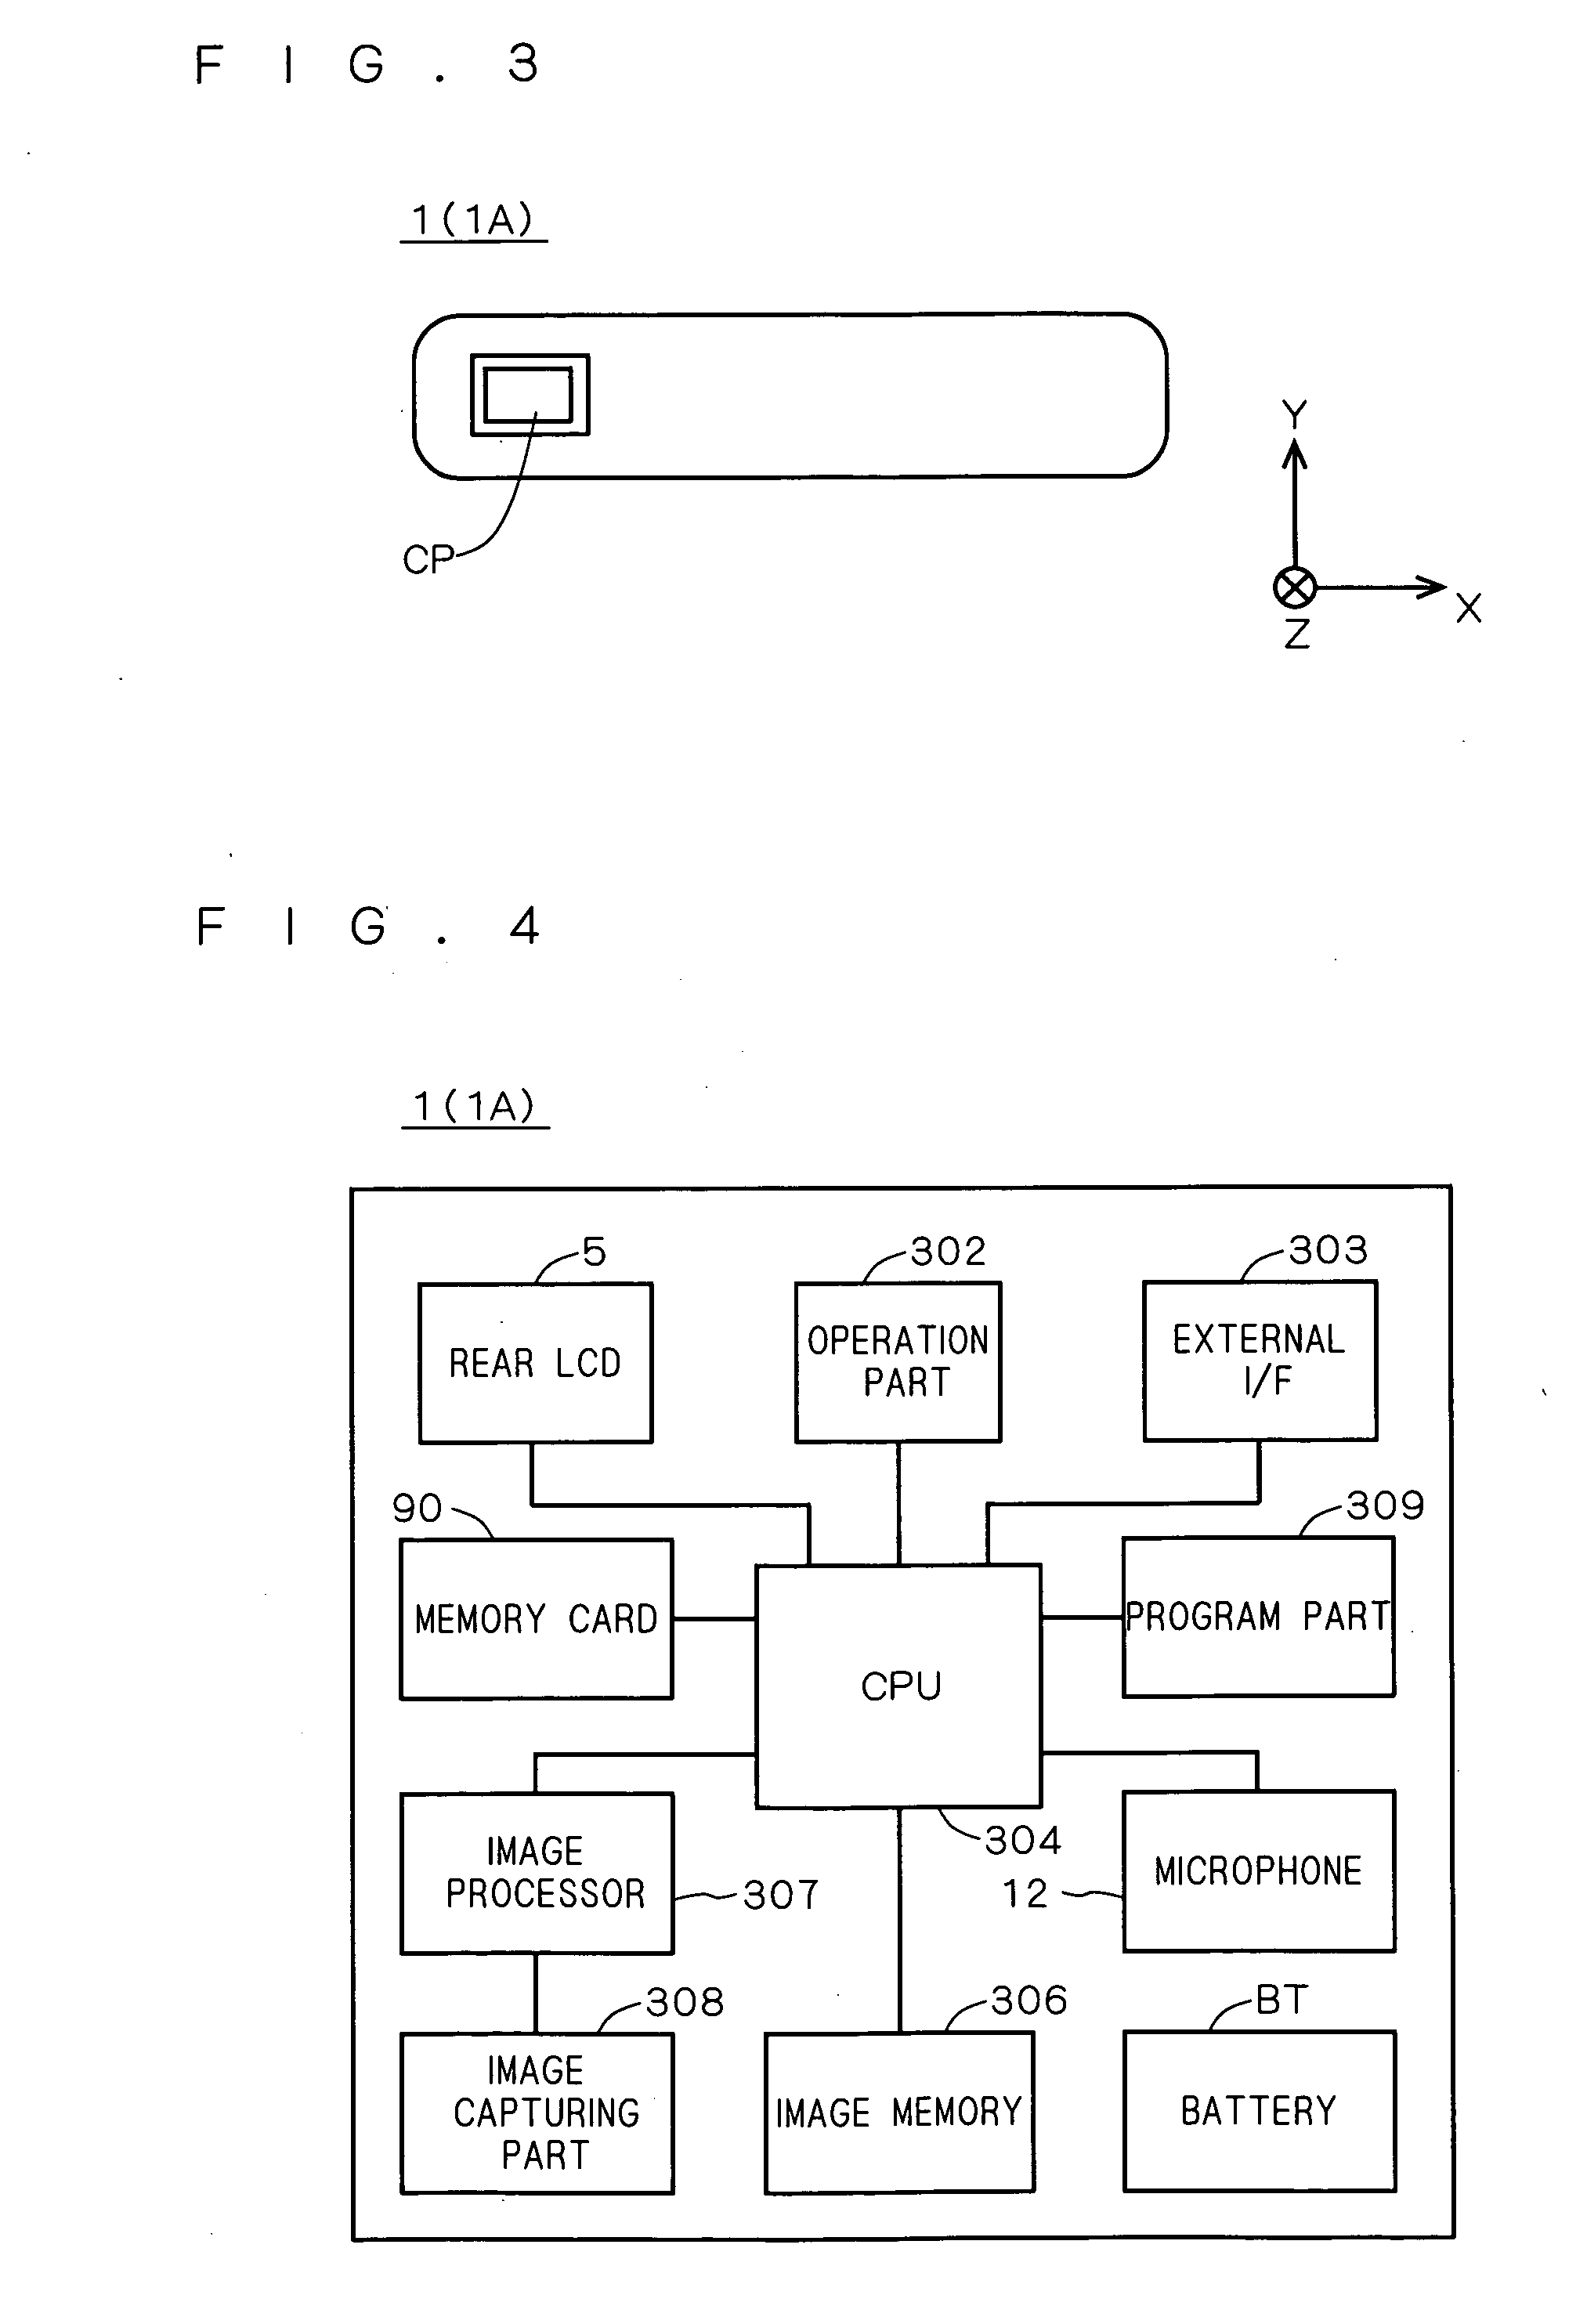 Image capturing apparatus and navigation system